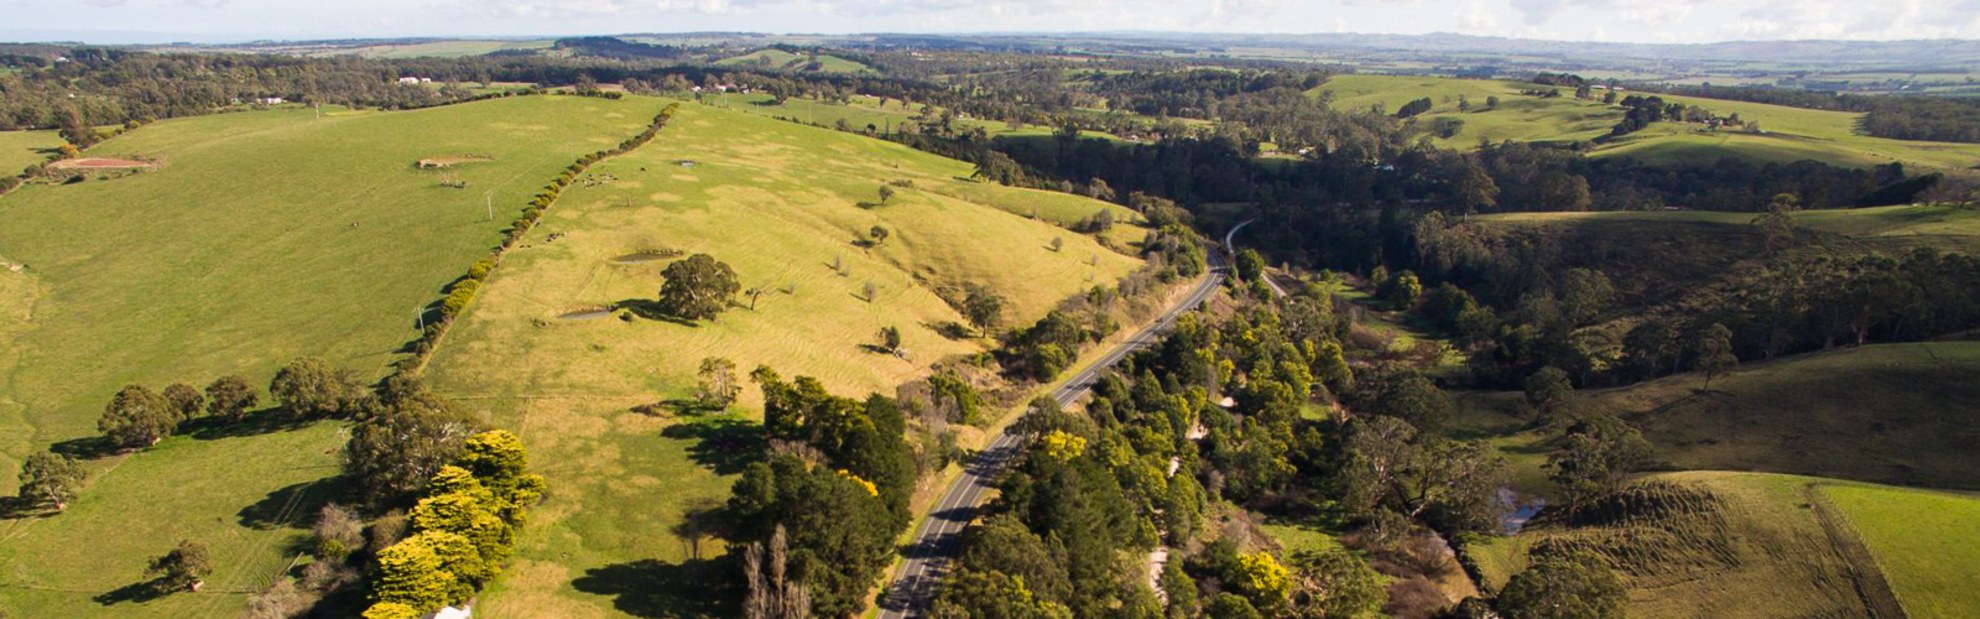 Aerial view of the South Gippsland Highway surrounded by green landscape